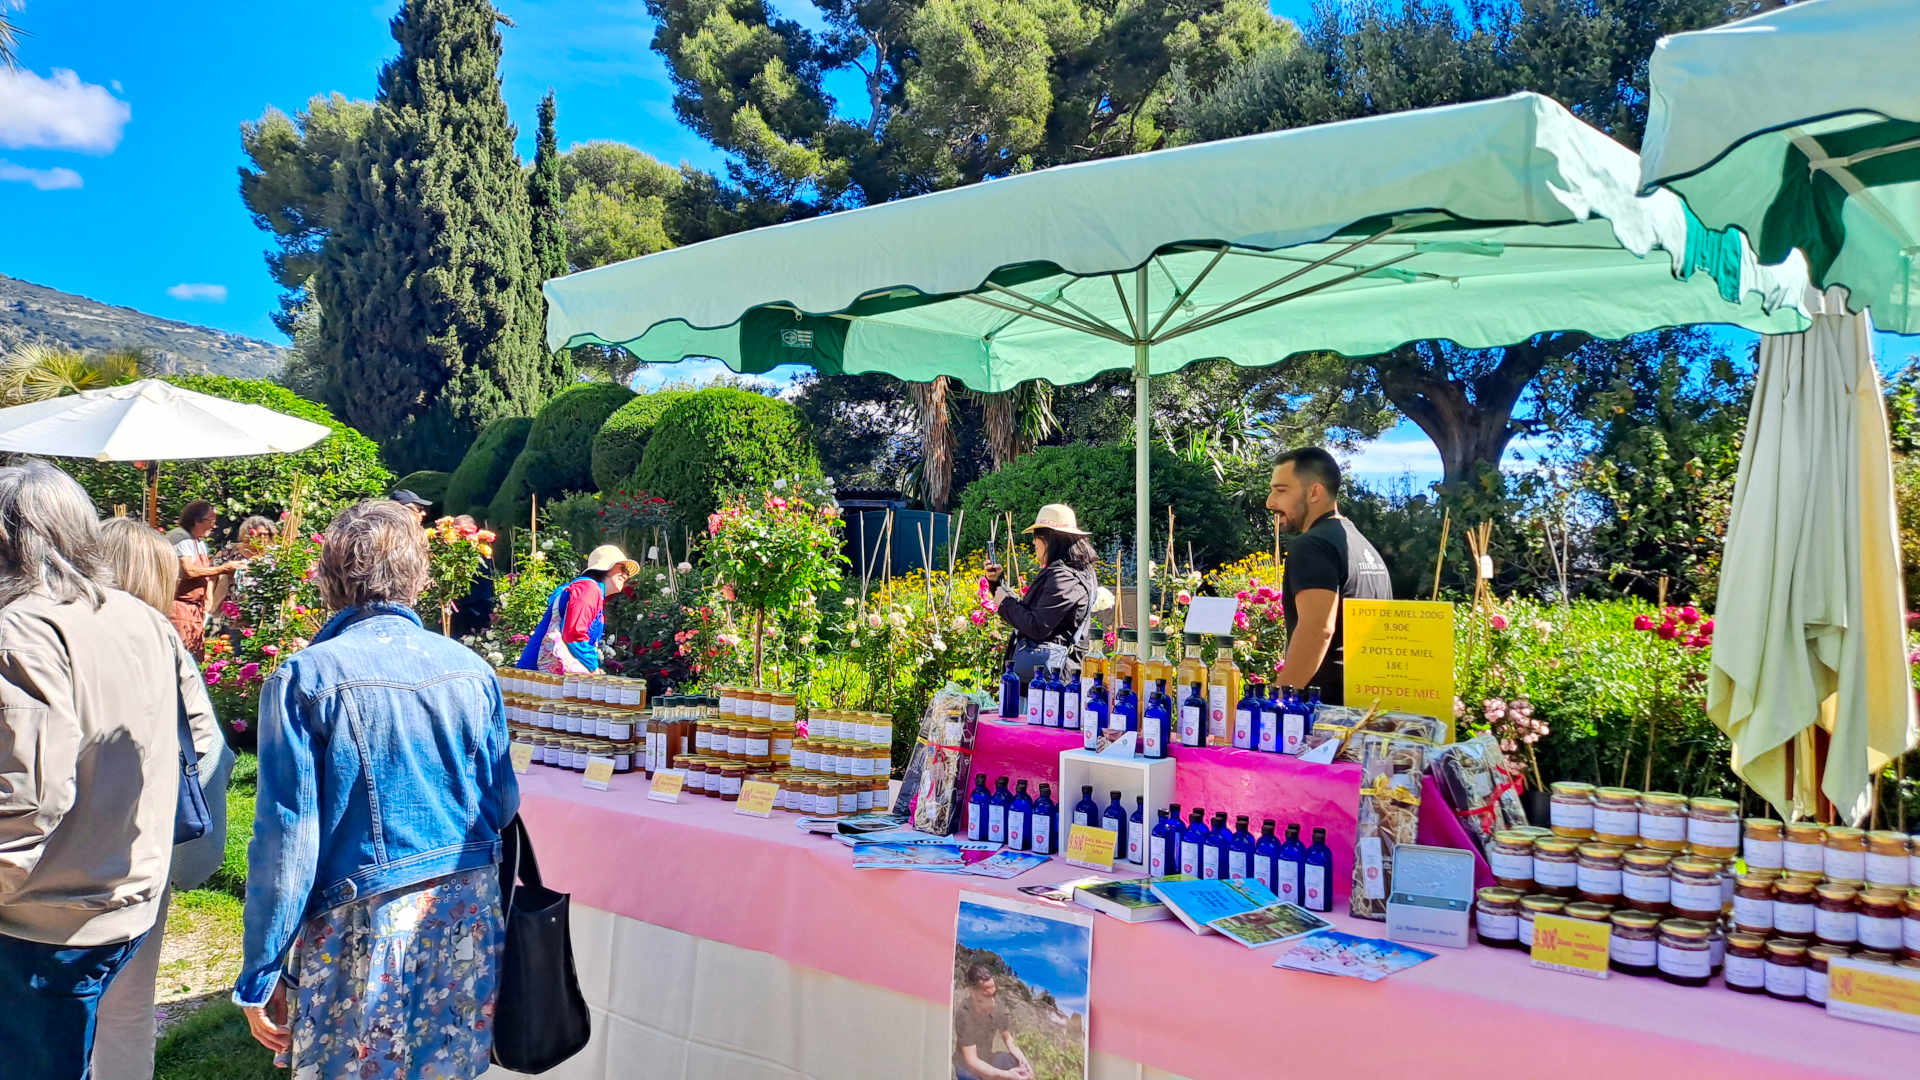 producteurs local sirops miels confitures huiles olives 06 cannes grasse antibes